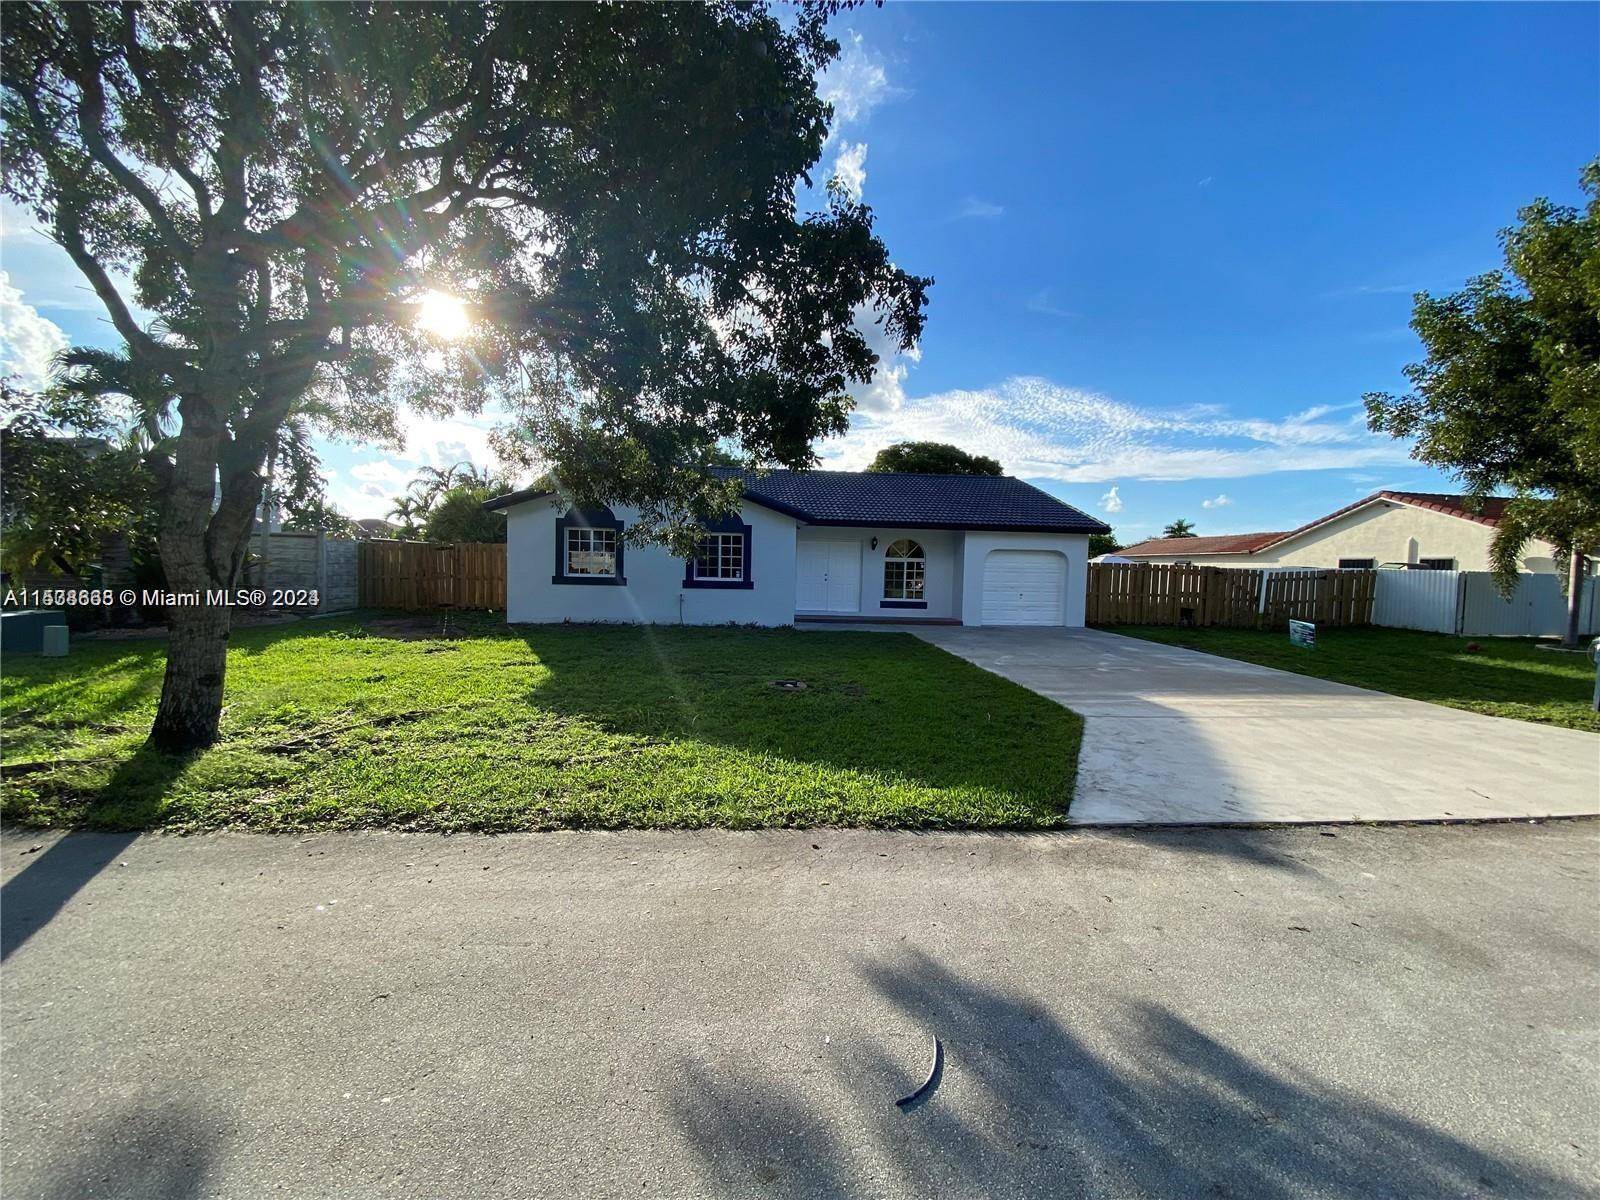 THIS single family provides space on both side, big enough for family, boat, RV, NO ASSOCIATION, EXCELLENT AREA, MOVE IN READY, 4 2 Locate in very high demand area, sitting ...